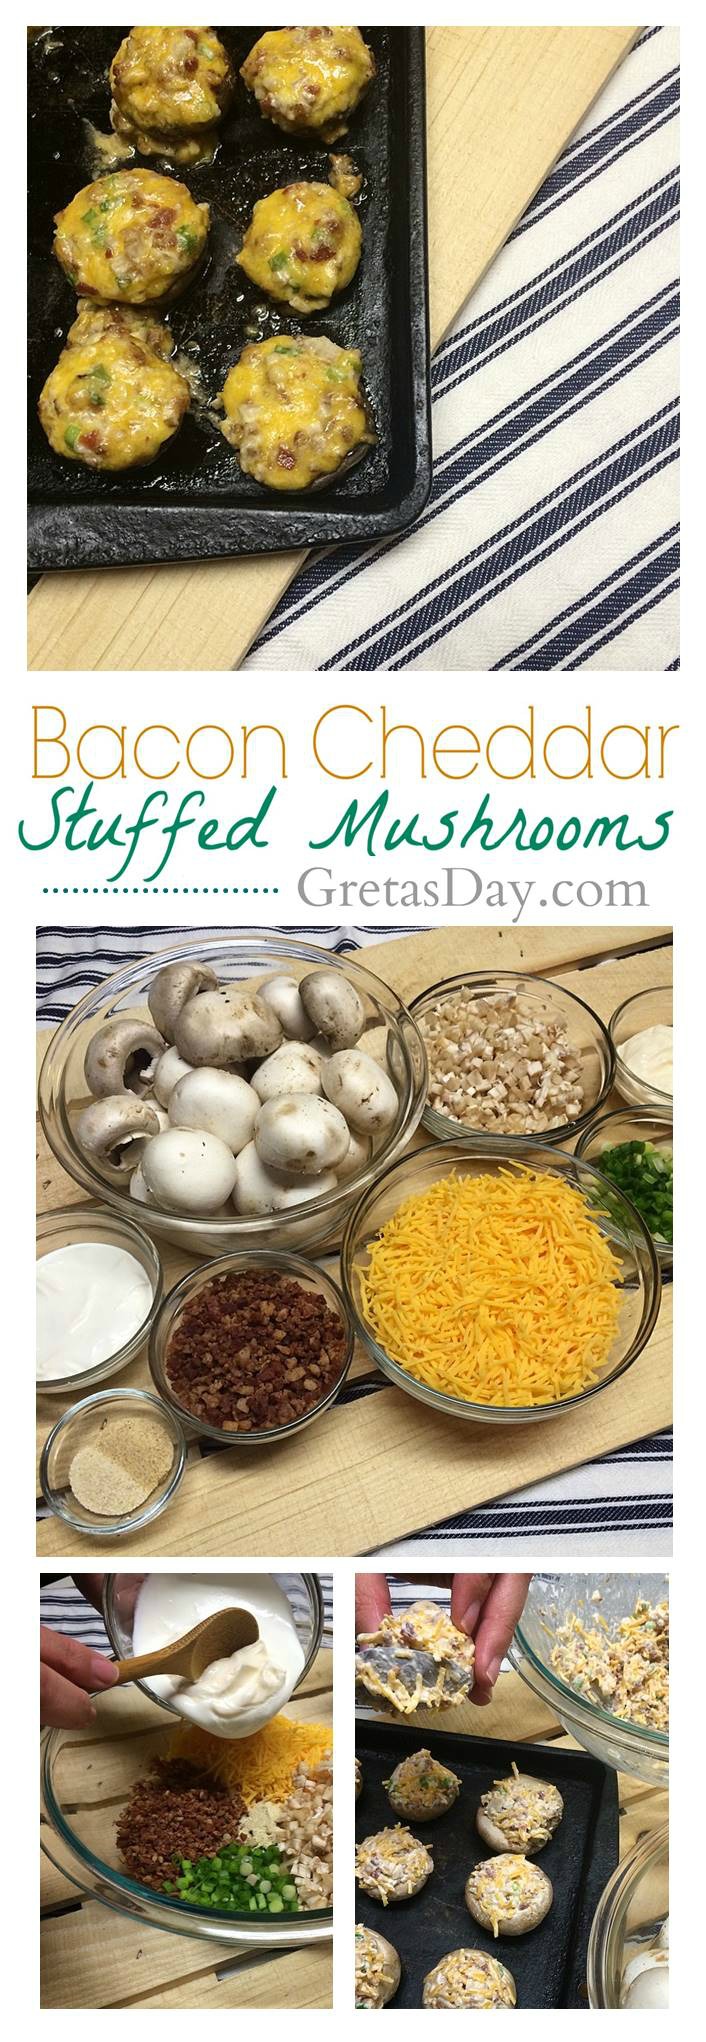 Hw to make the best bacon cheddar stuffed mushrooms